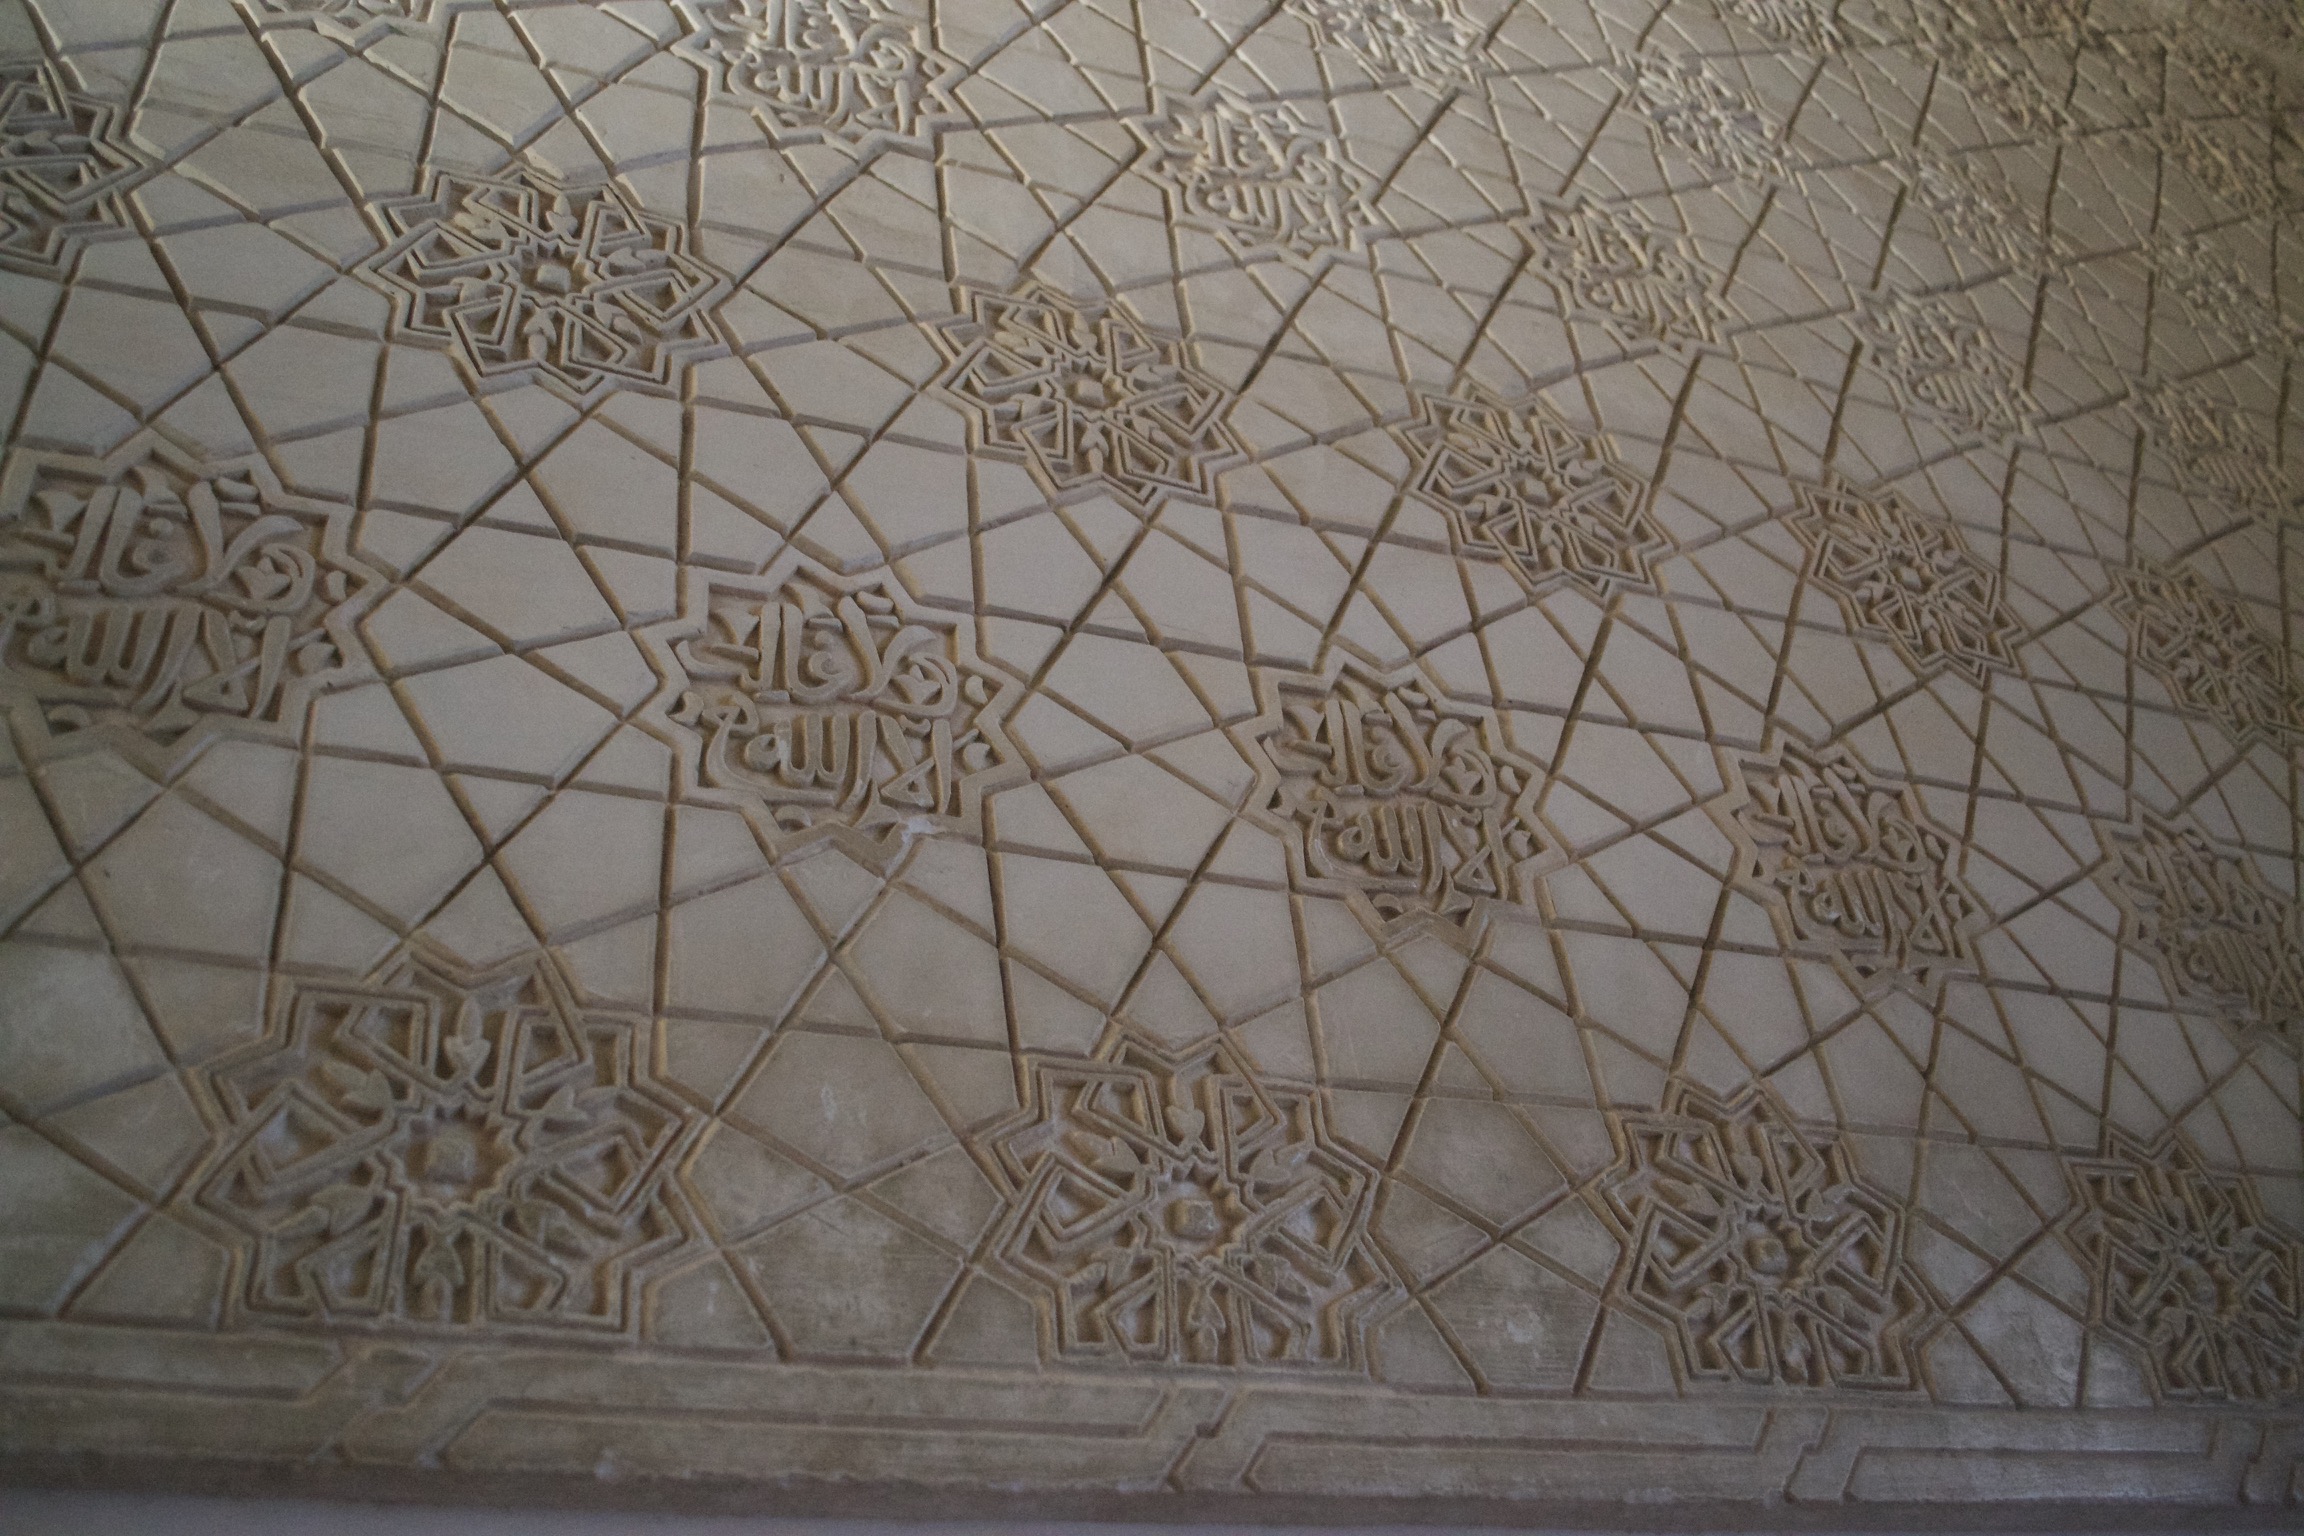 A tesselation of eight-pointed stars and rays emanating from them.  The stars' interiors contain either geometric designs or Arabic inscriptions.